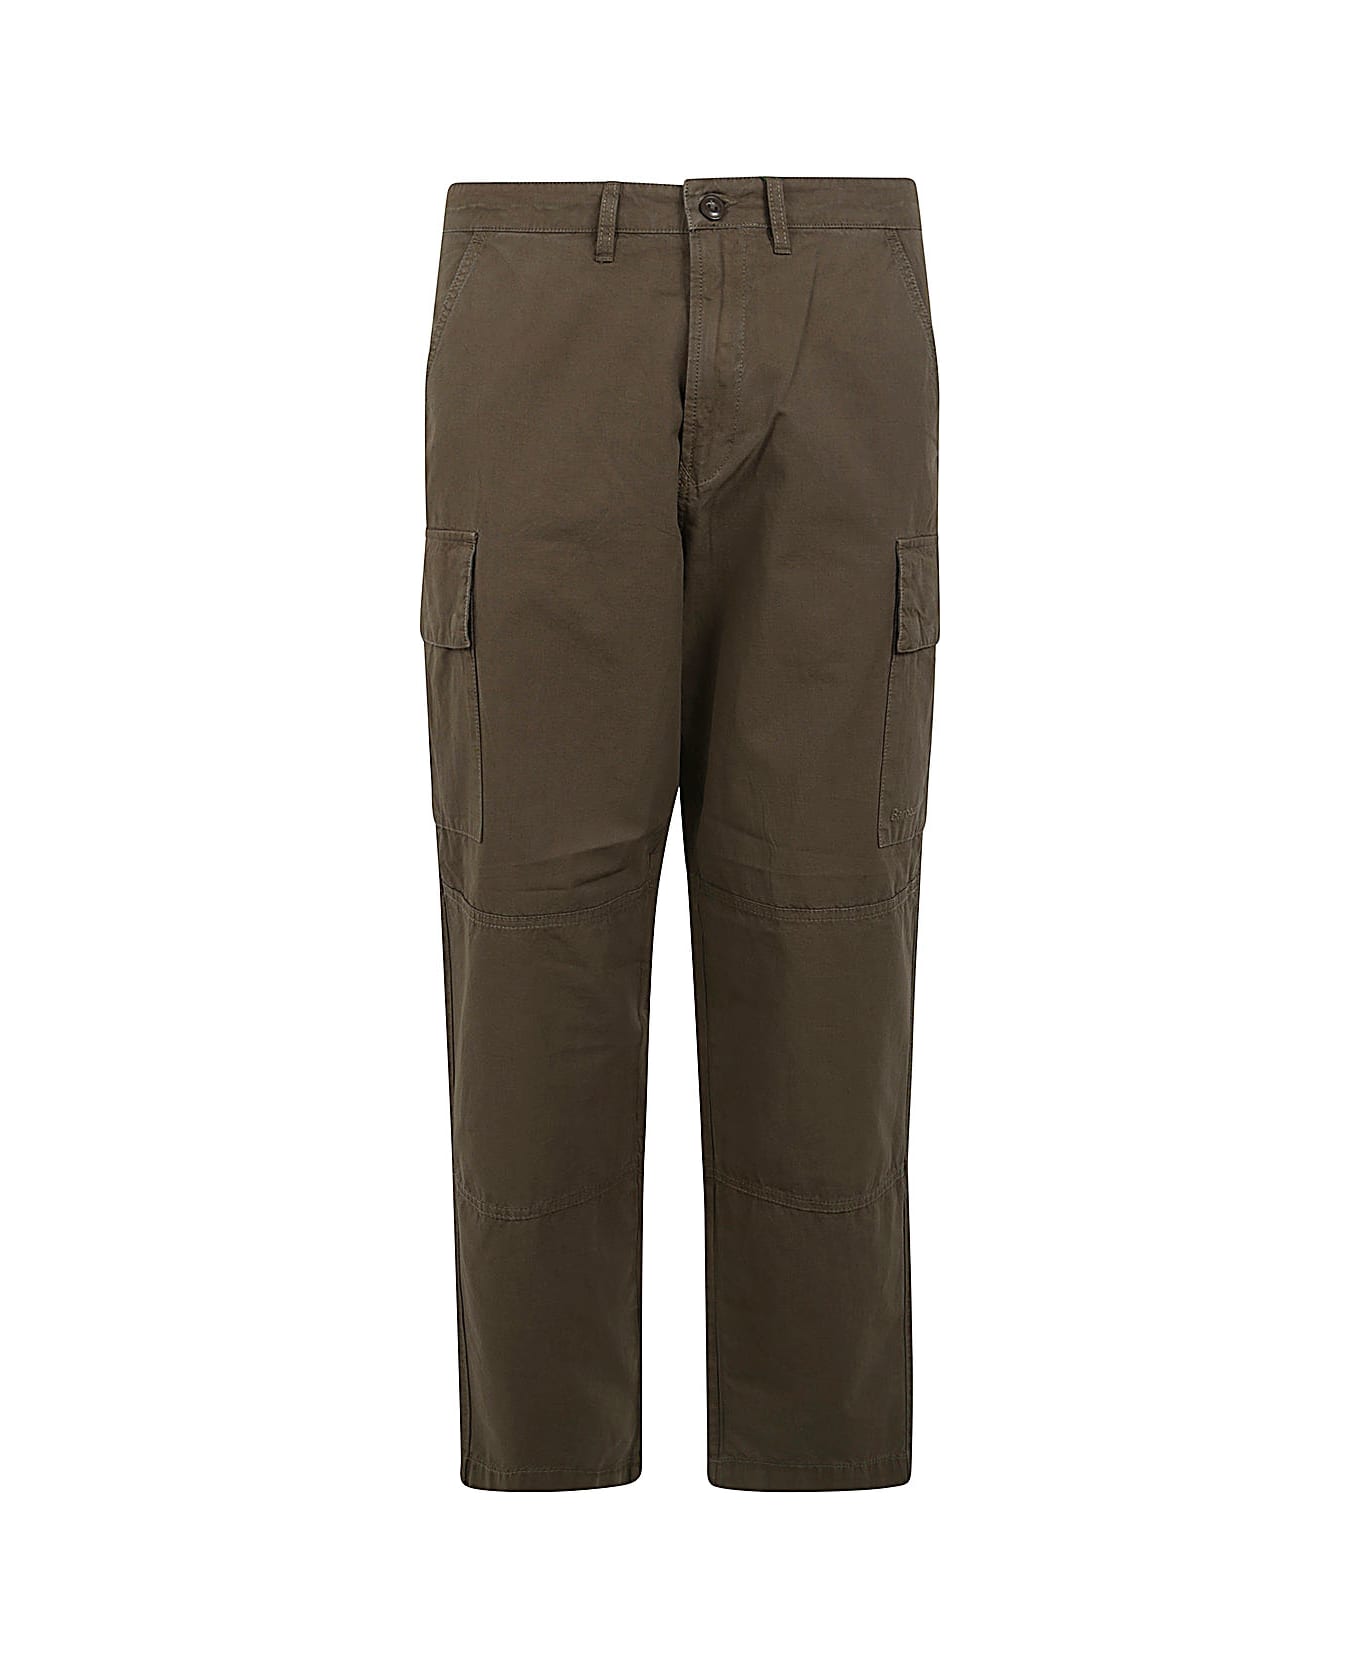 Barbour Essential Ripstop Cargo Trousers - Tarmac